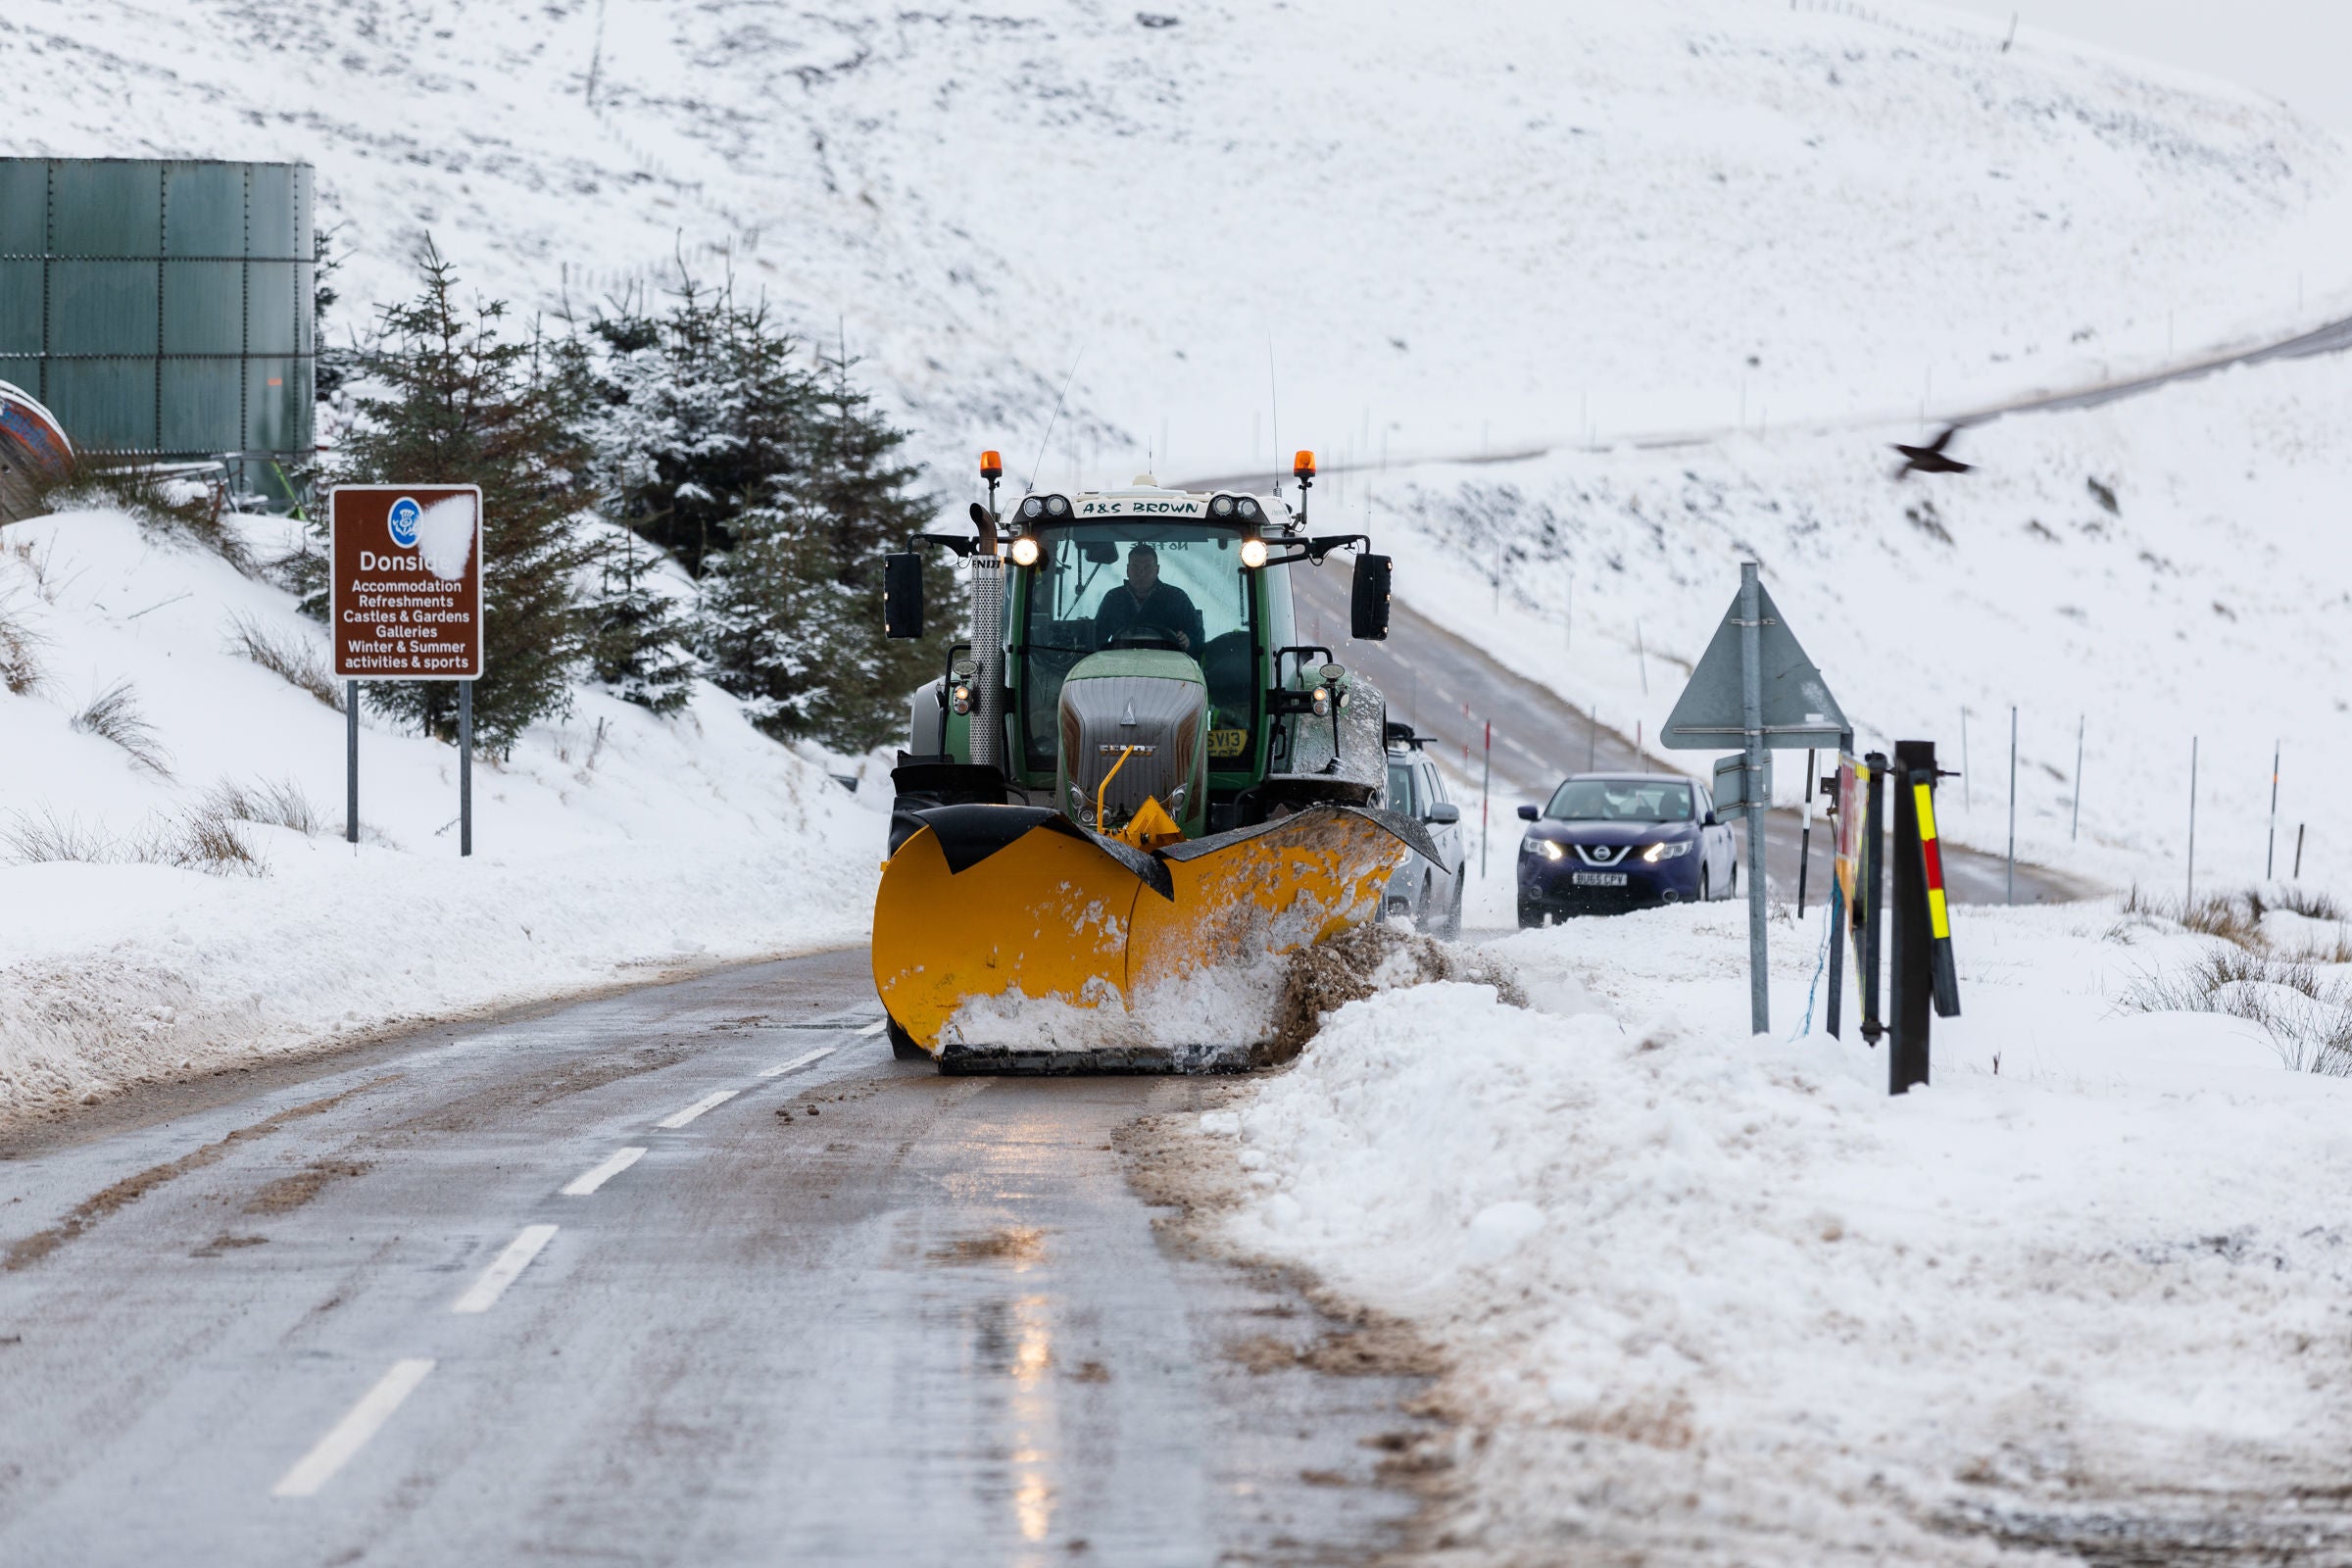 A snow plough clears the A939 after heavy snowfall in the Scottish Highlands